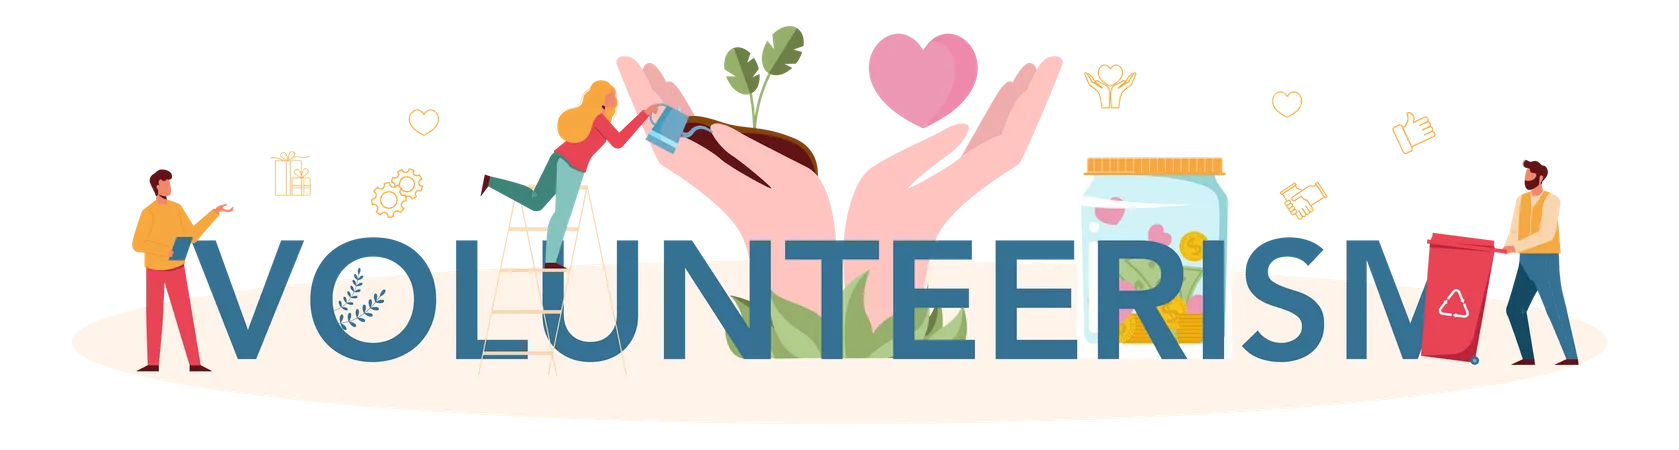 Volunteerism Typographic Header Charity Community Support People Donate Clothes Take Care Of The Planet Make A Donation Idea Of Care And Humanity Isolated Vector Illustration Illustration